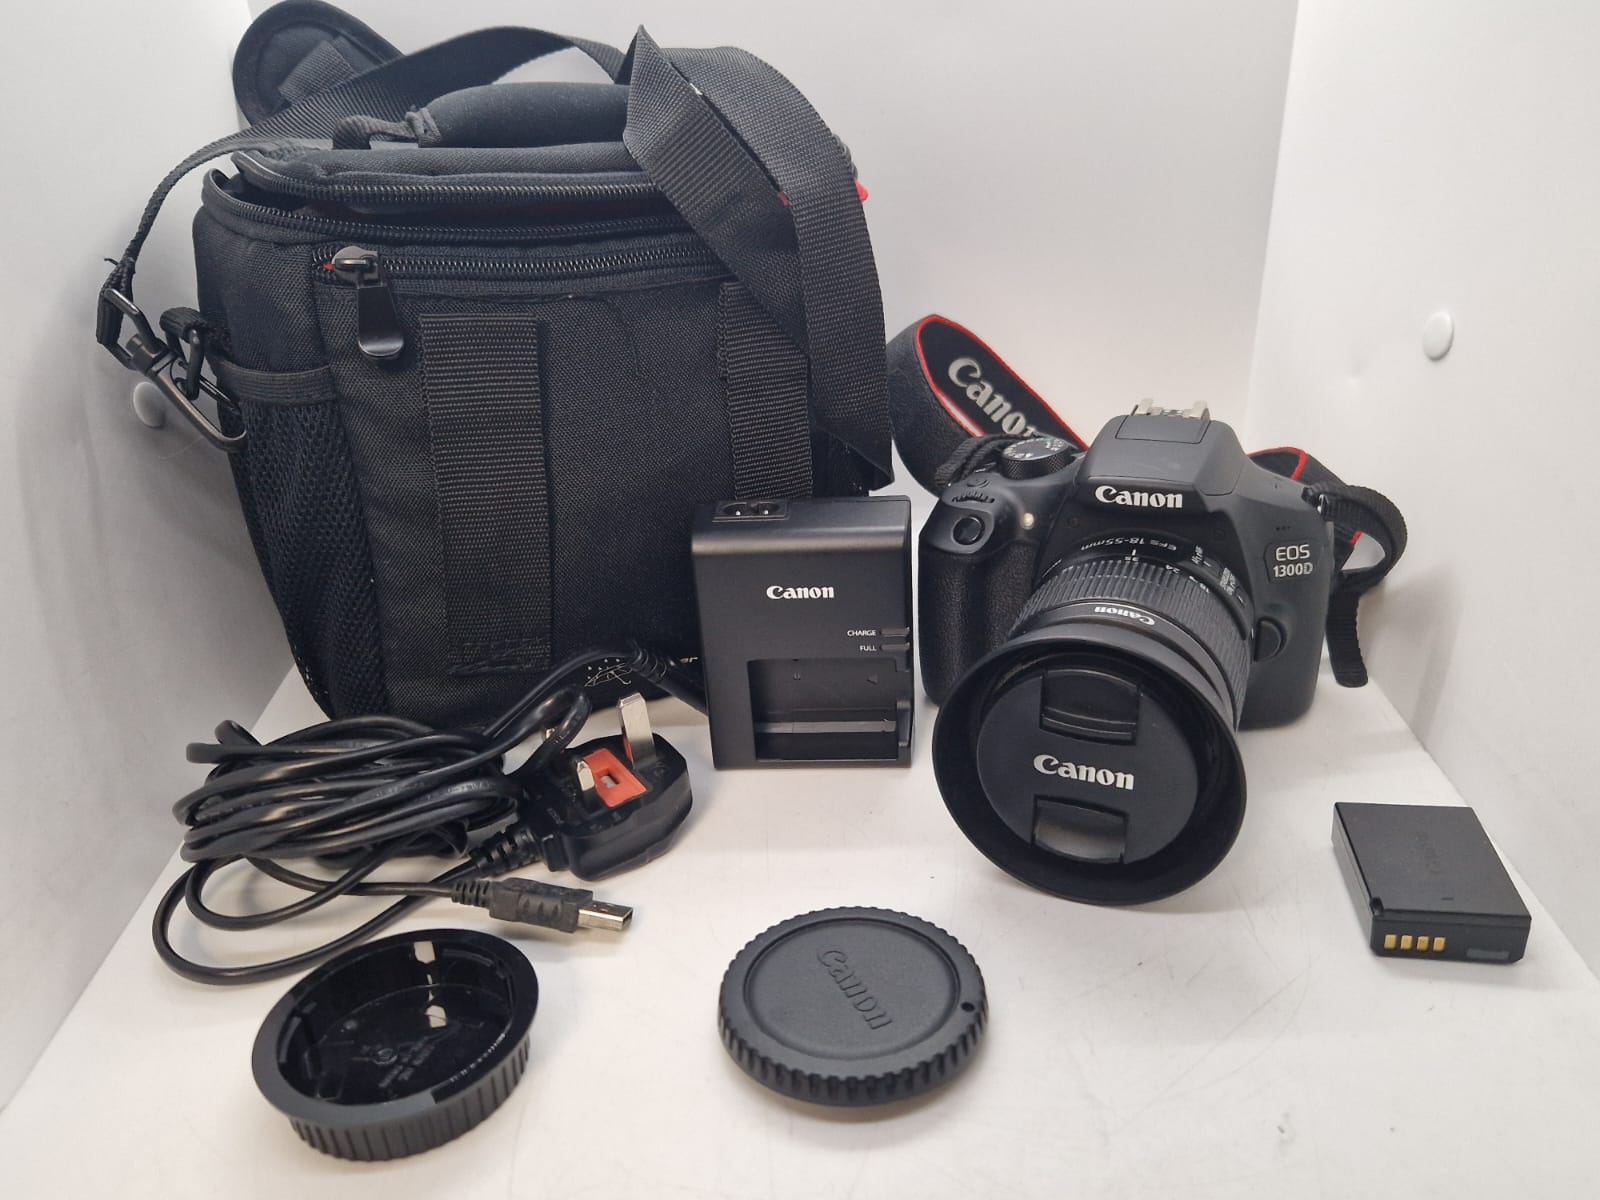 Canon EOS 1300D DSLR Camera - Black (with 18-55mm lens)